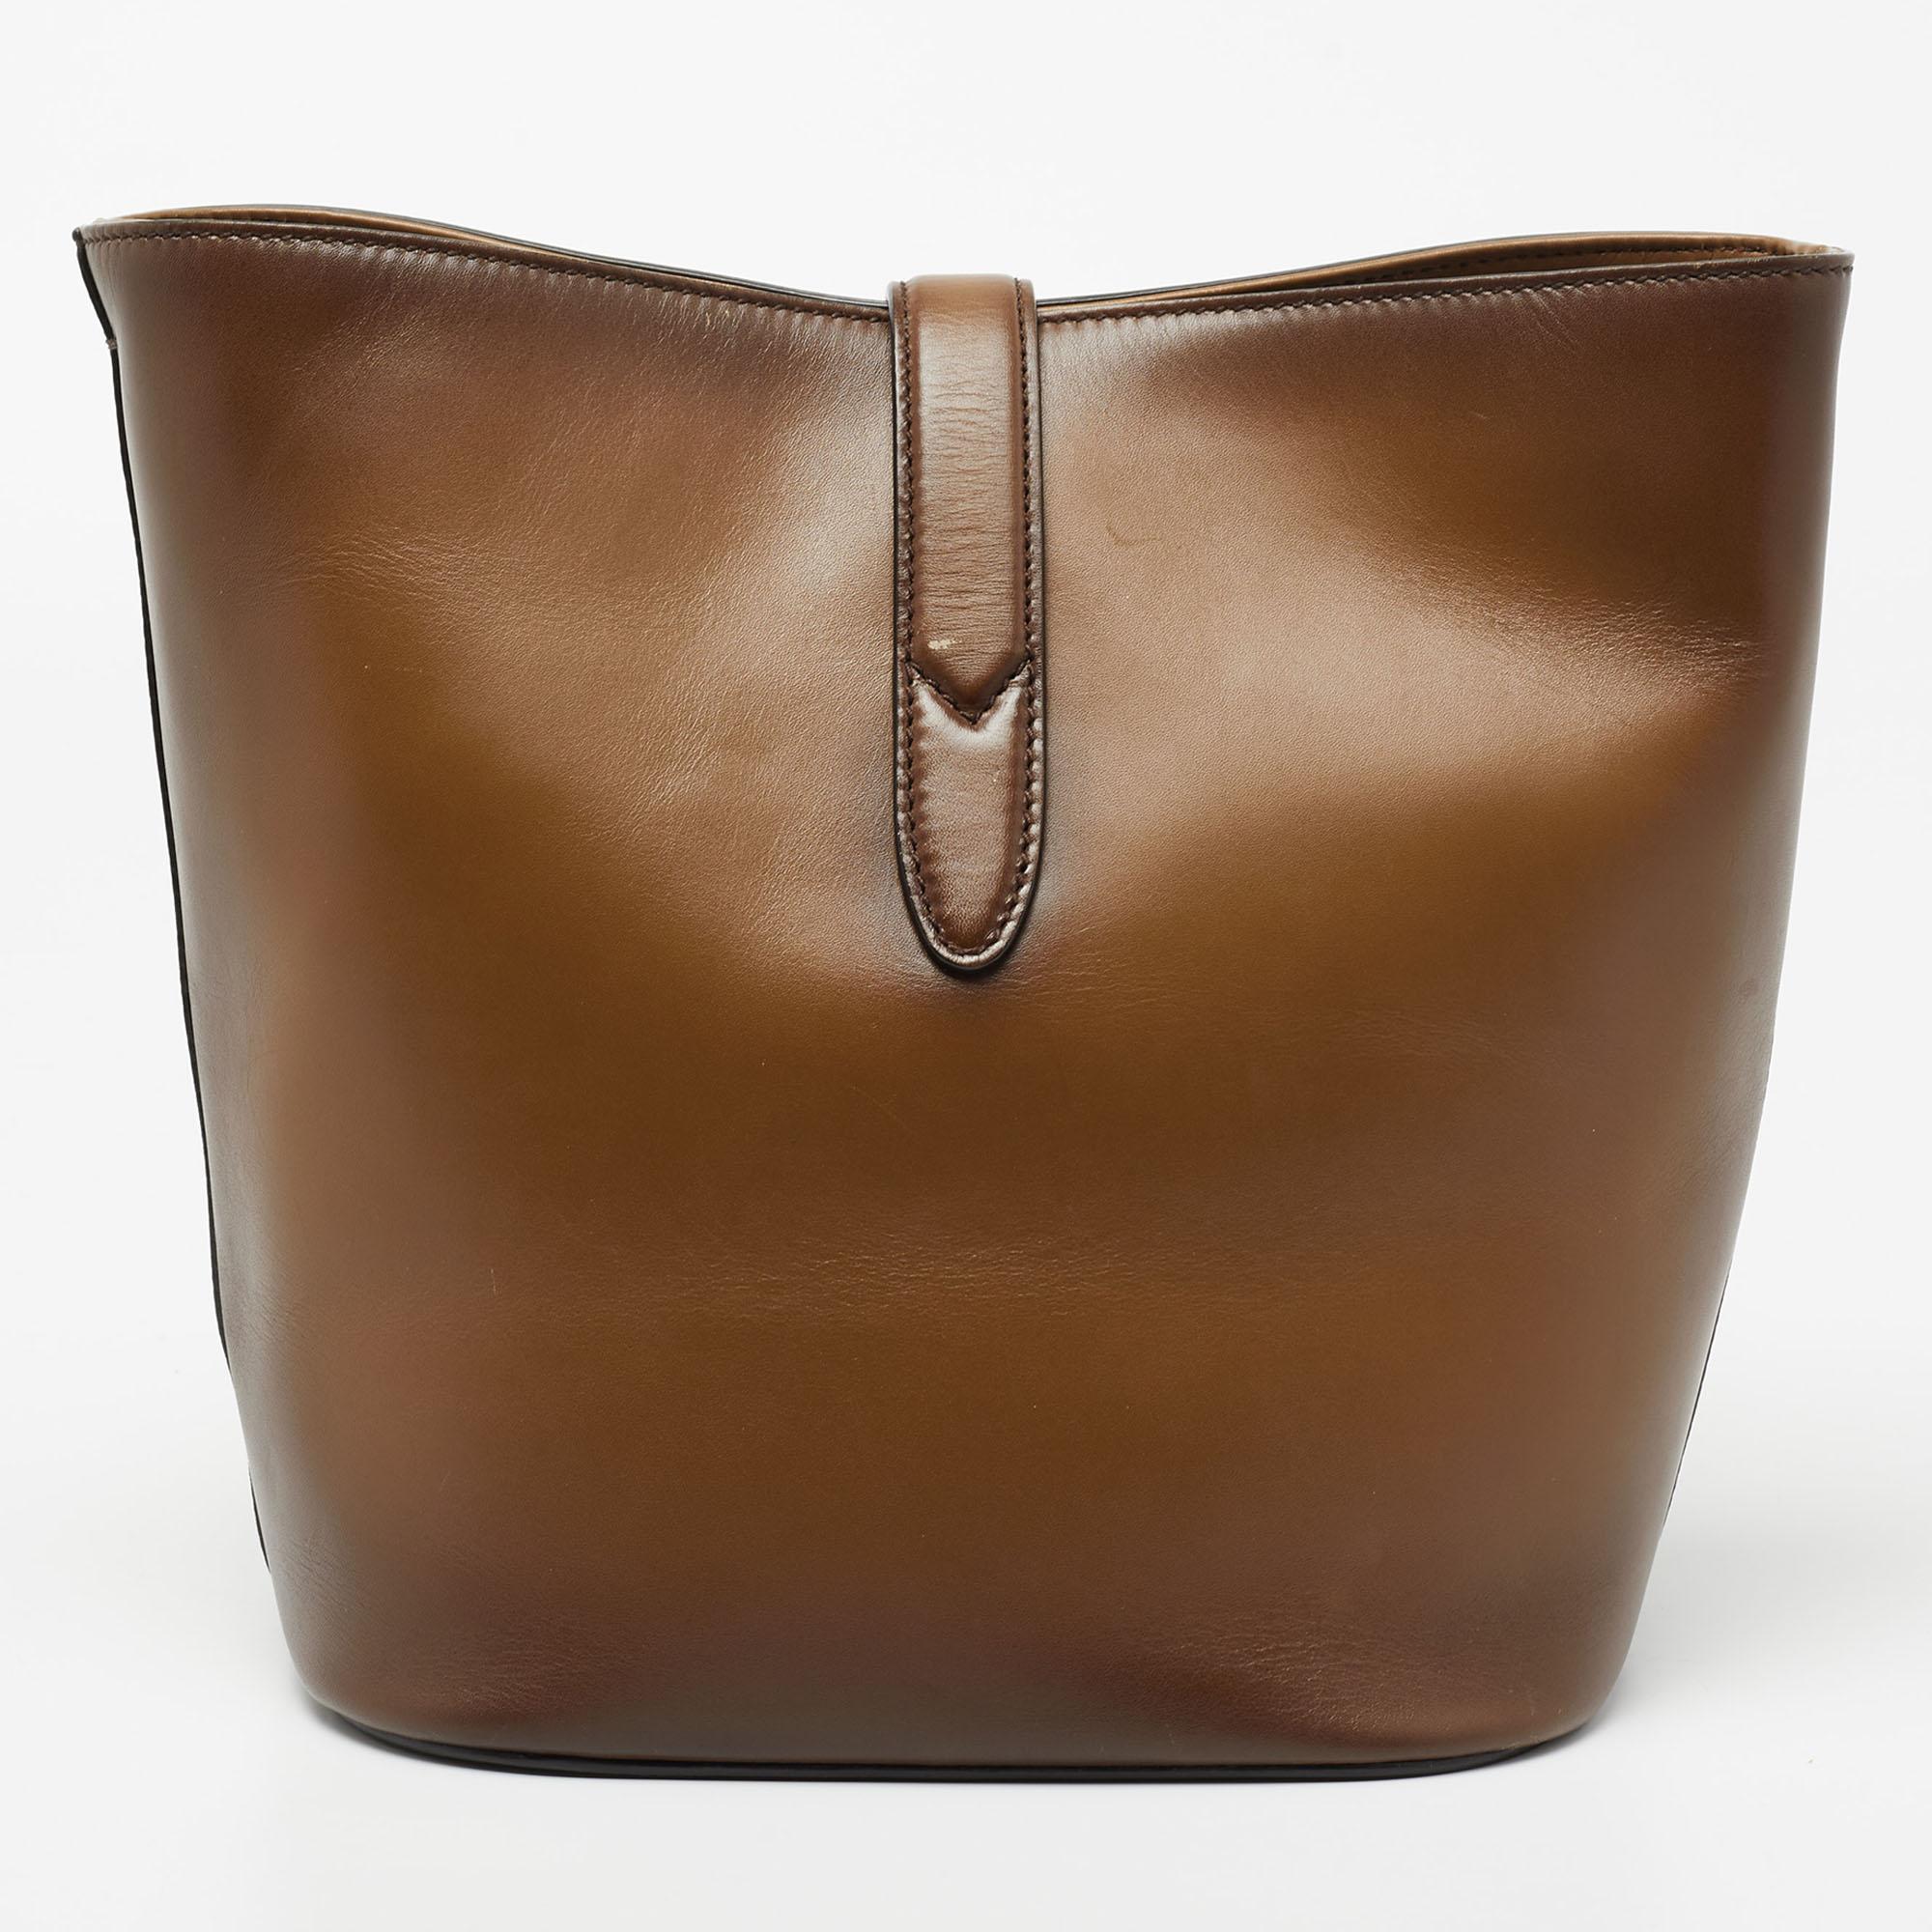 A bag should be stylish, easy to carry, and versatile, and this Jackie bag by Gucci ticks all these boxes. Made in Italy from high-end leather, it carries a brown hue in an ombré style that will go well with anything from florals to monochrome